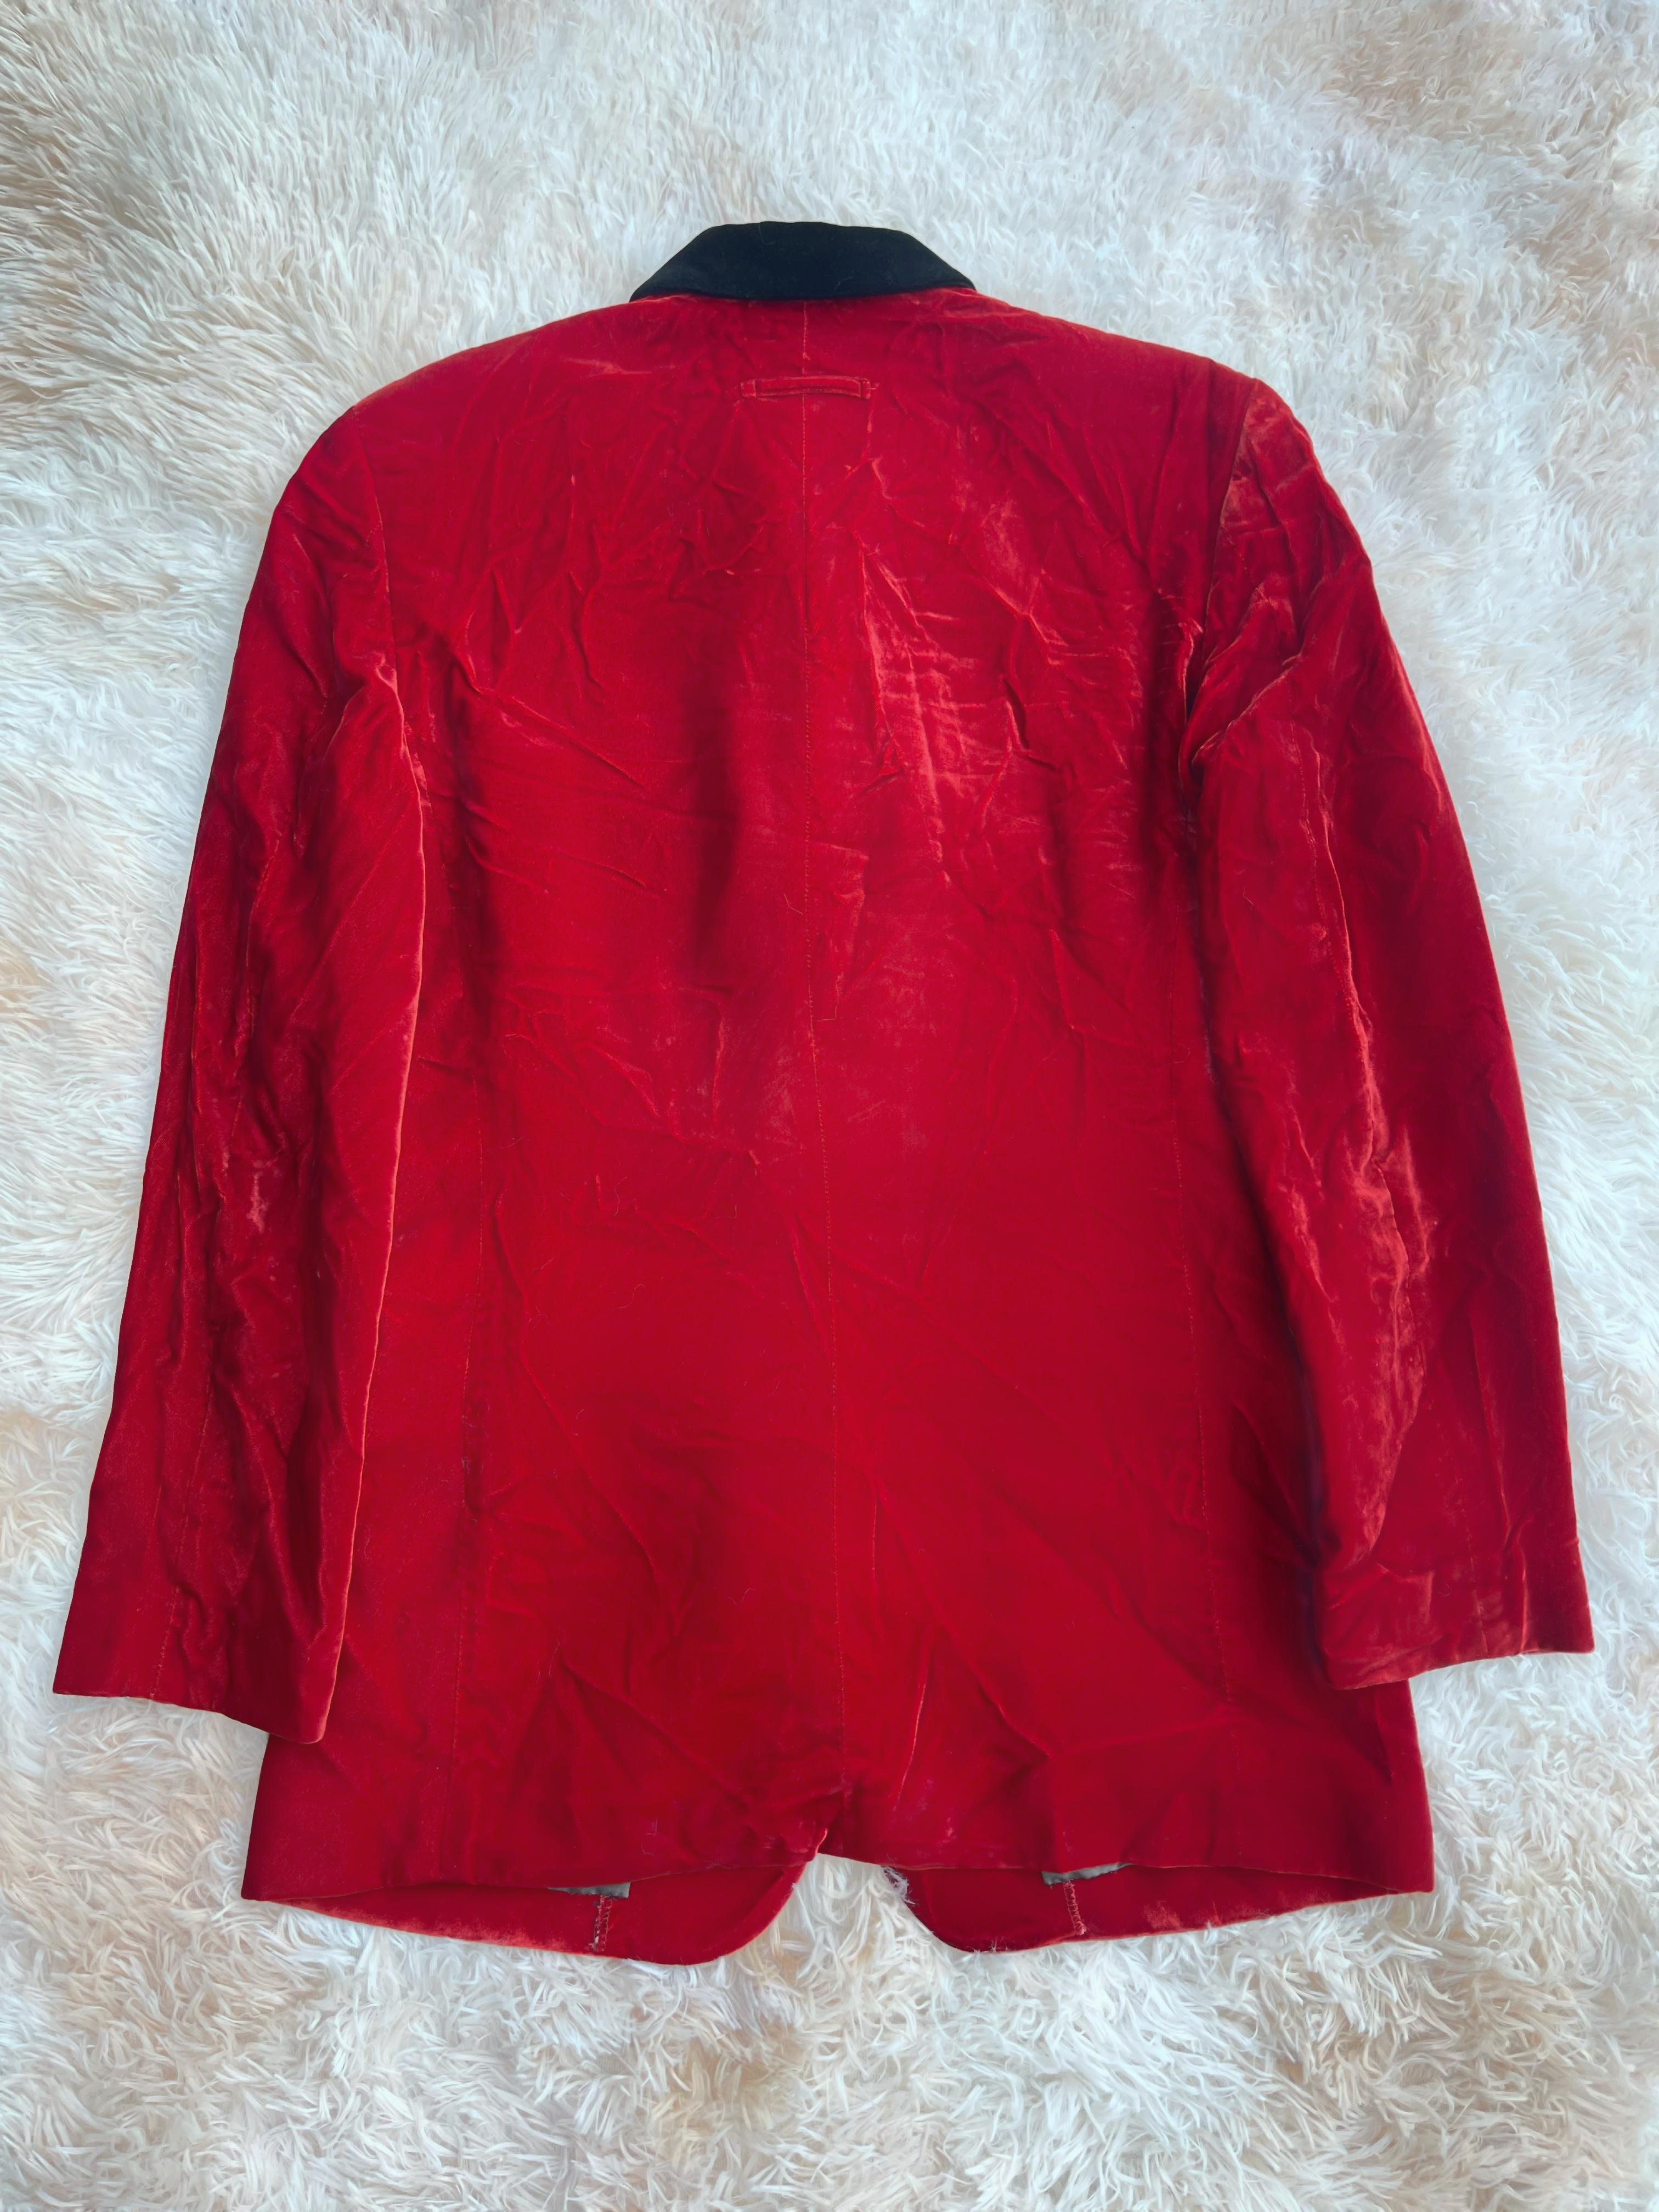 Jean Paul Gaultier Homme 1990's Velvet Blazer in Red In Good Condition For Sale In Tương Mai Ward, Hoang Mai District